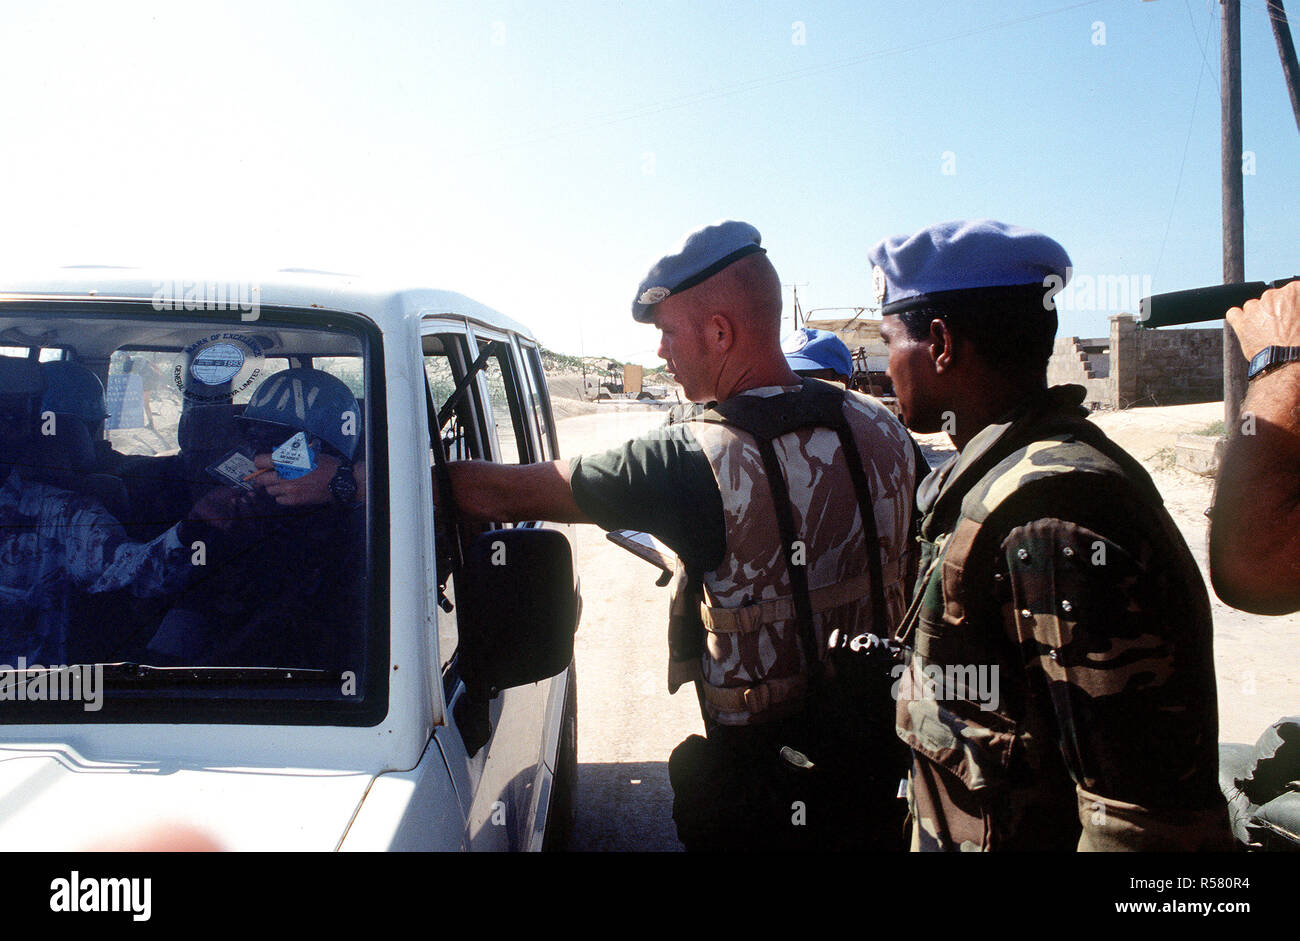 A Belgian soldier performs a security check on a vehicle trying to enter the compound in Kismayo.  The Belgian contingent is part of the United Nations Forces in Somalia in support of OPERATION CONTINUE HOPE. Stock Photo